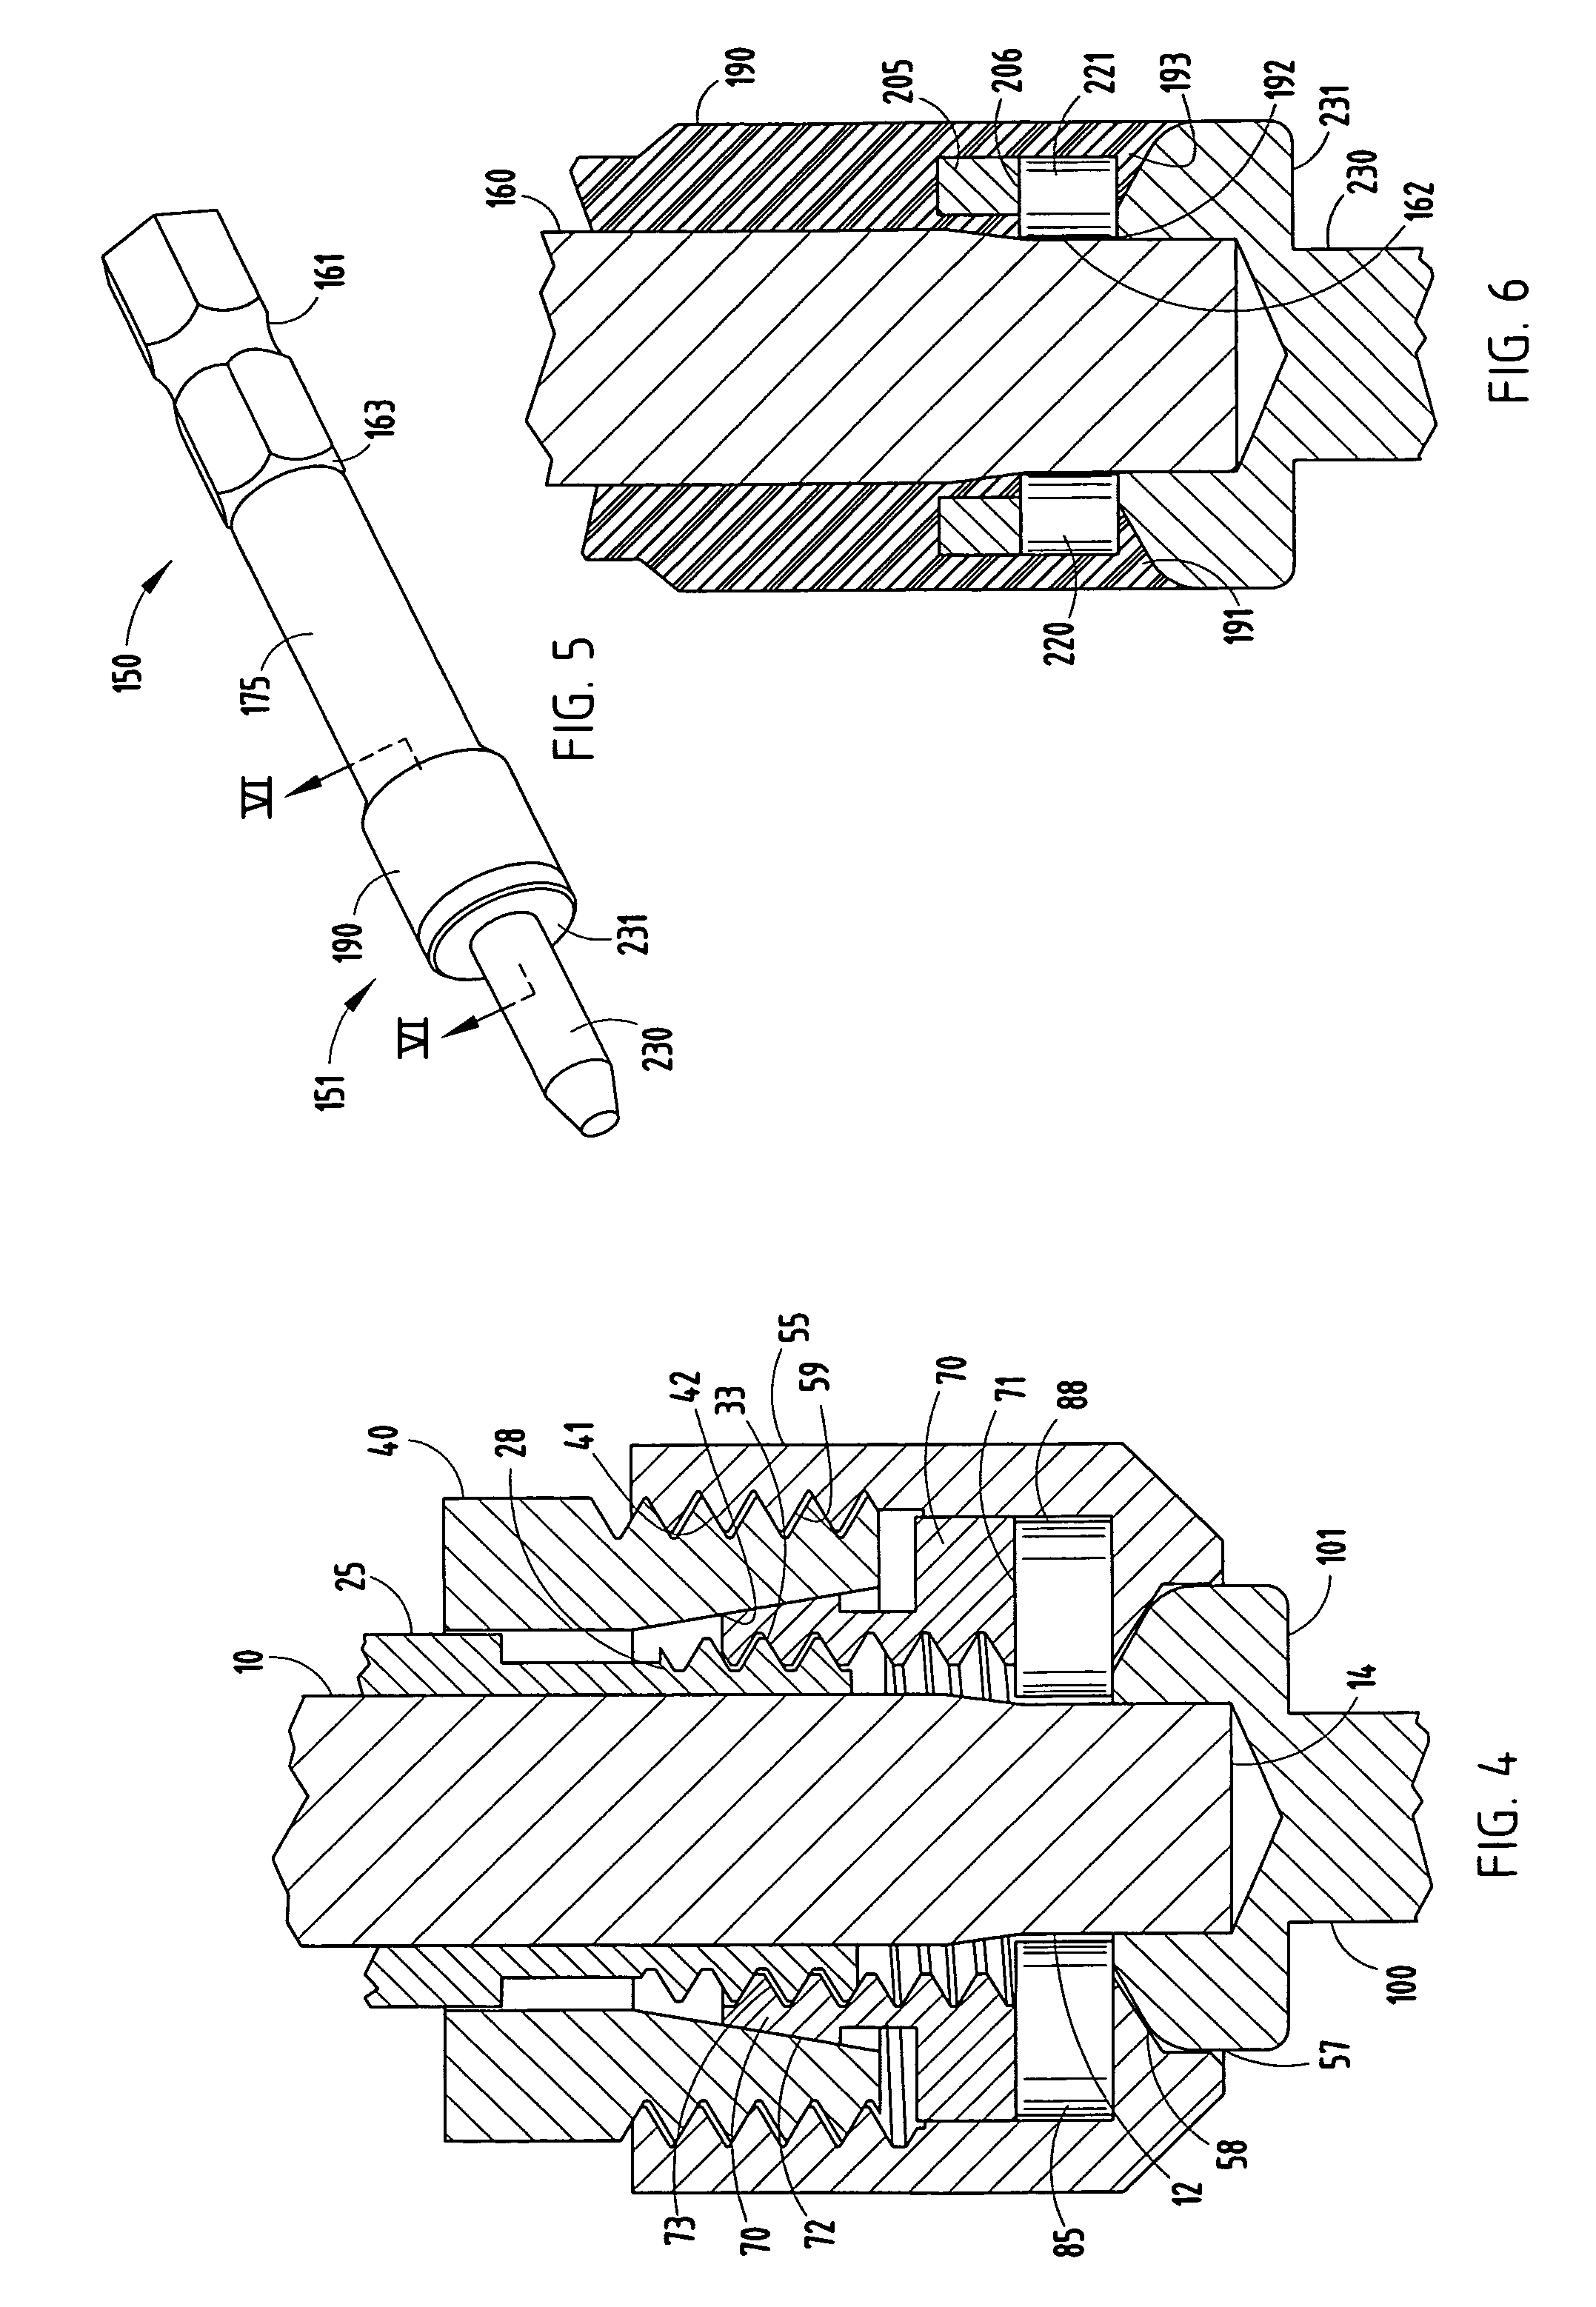 Magnetic device for attracting and retaining fasteners